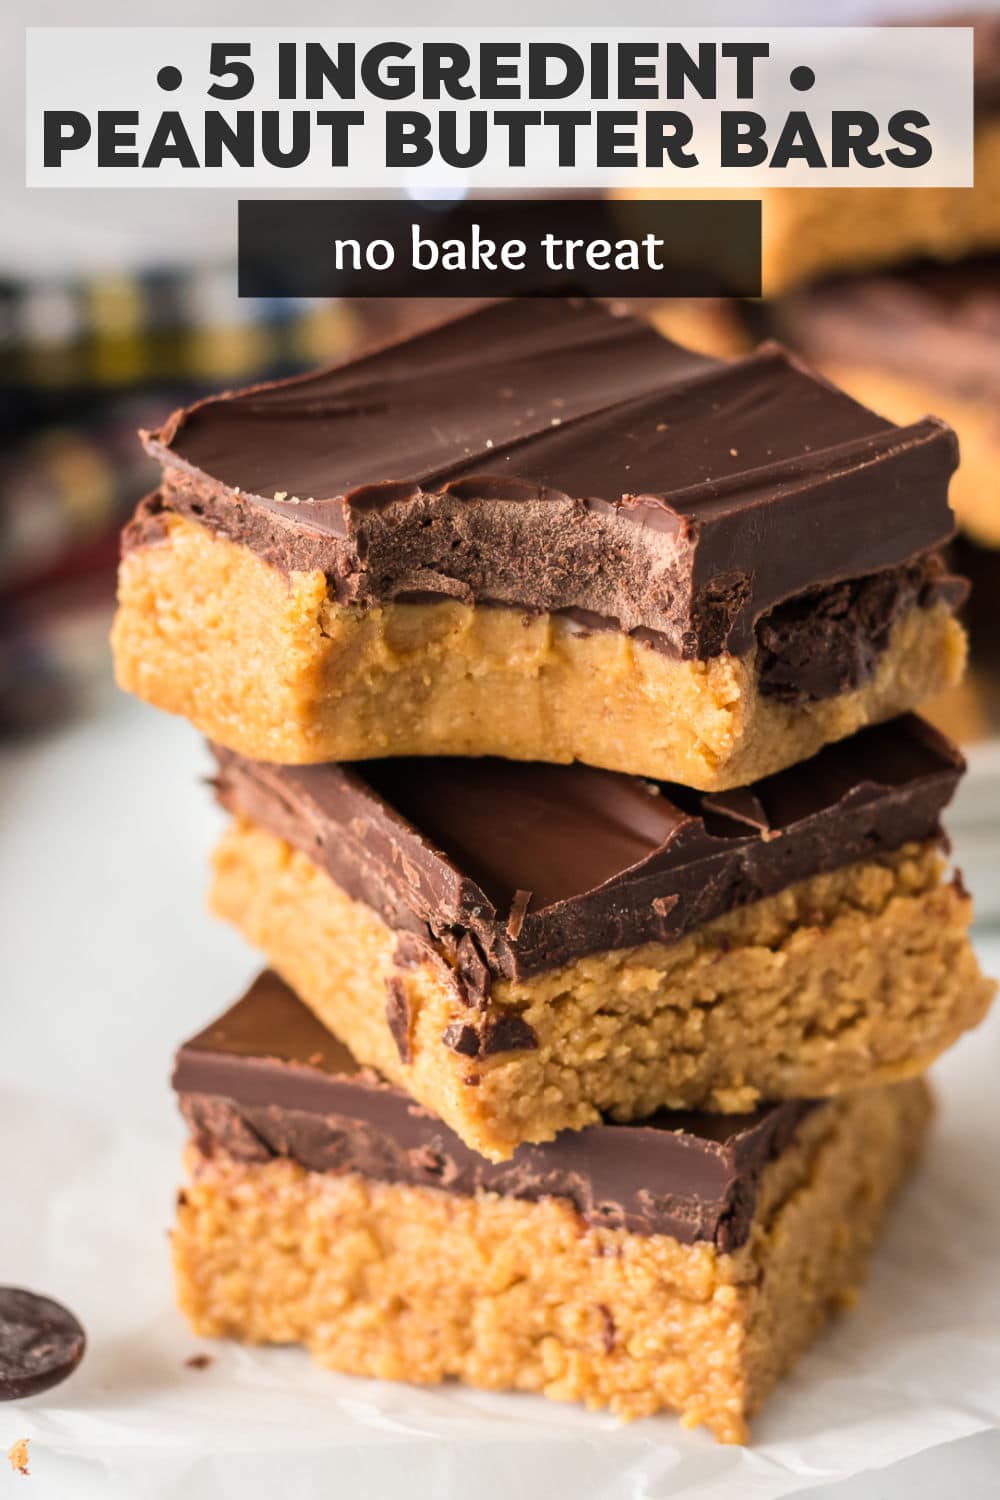 These no bake chocolate peanut butter bars have all the flavors of peanut butter cups in the form of a dessert bar made with just 5 ingredients! With no oven required, these rich and decadent dessert bars come together quickly and easily for the tastiest anytime treat. | www.persnicketyplates.com